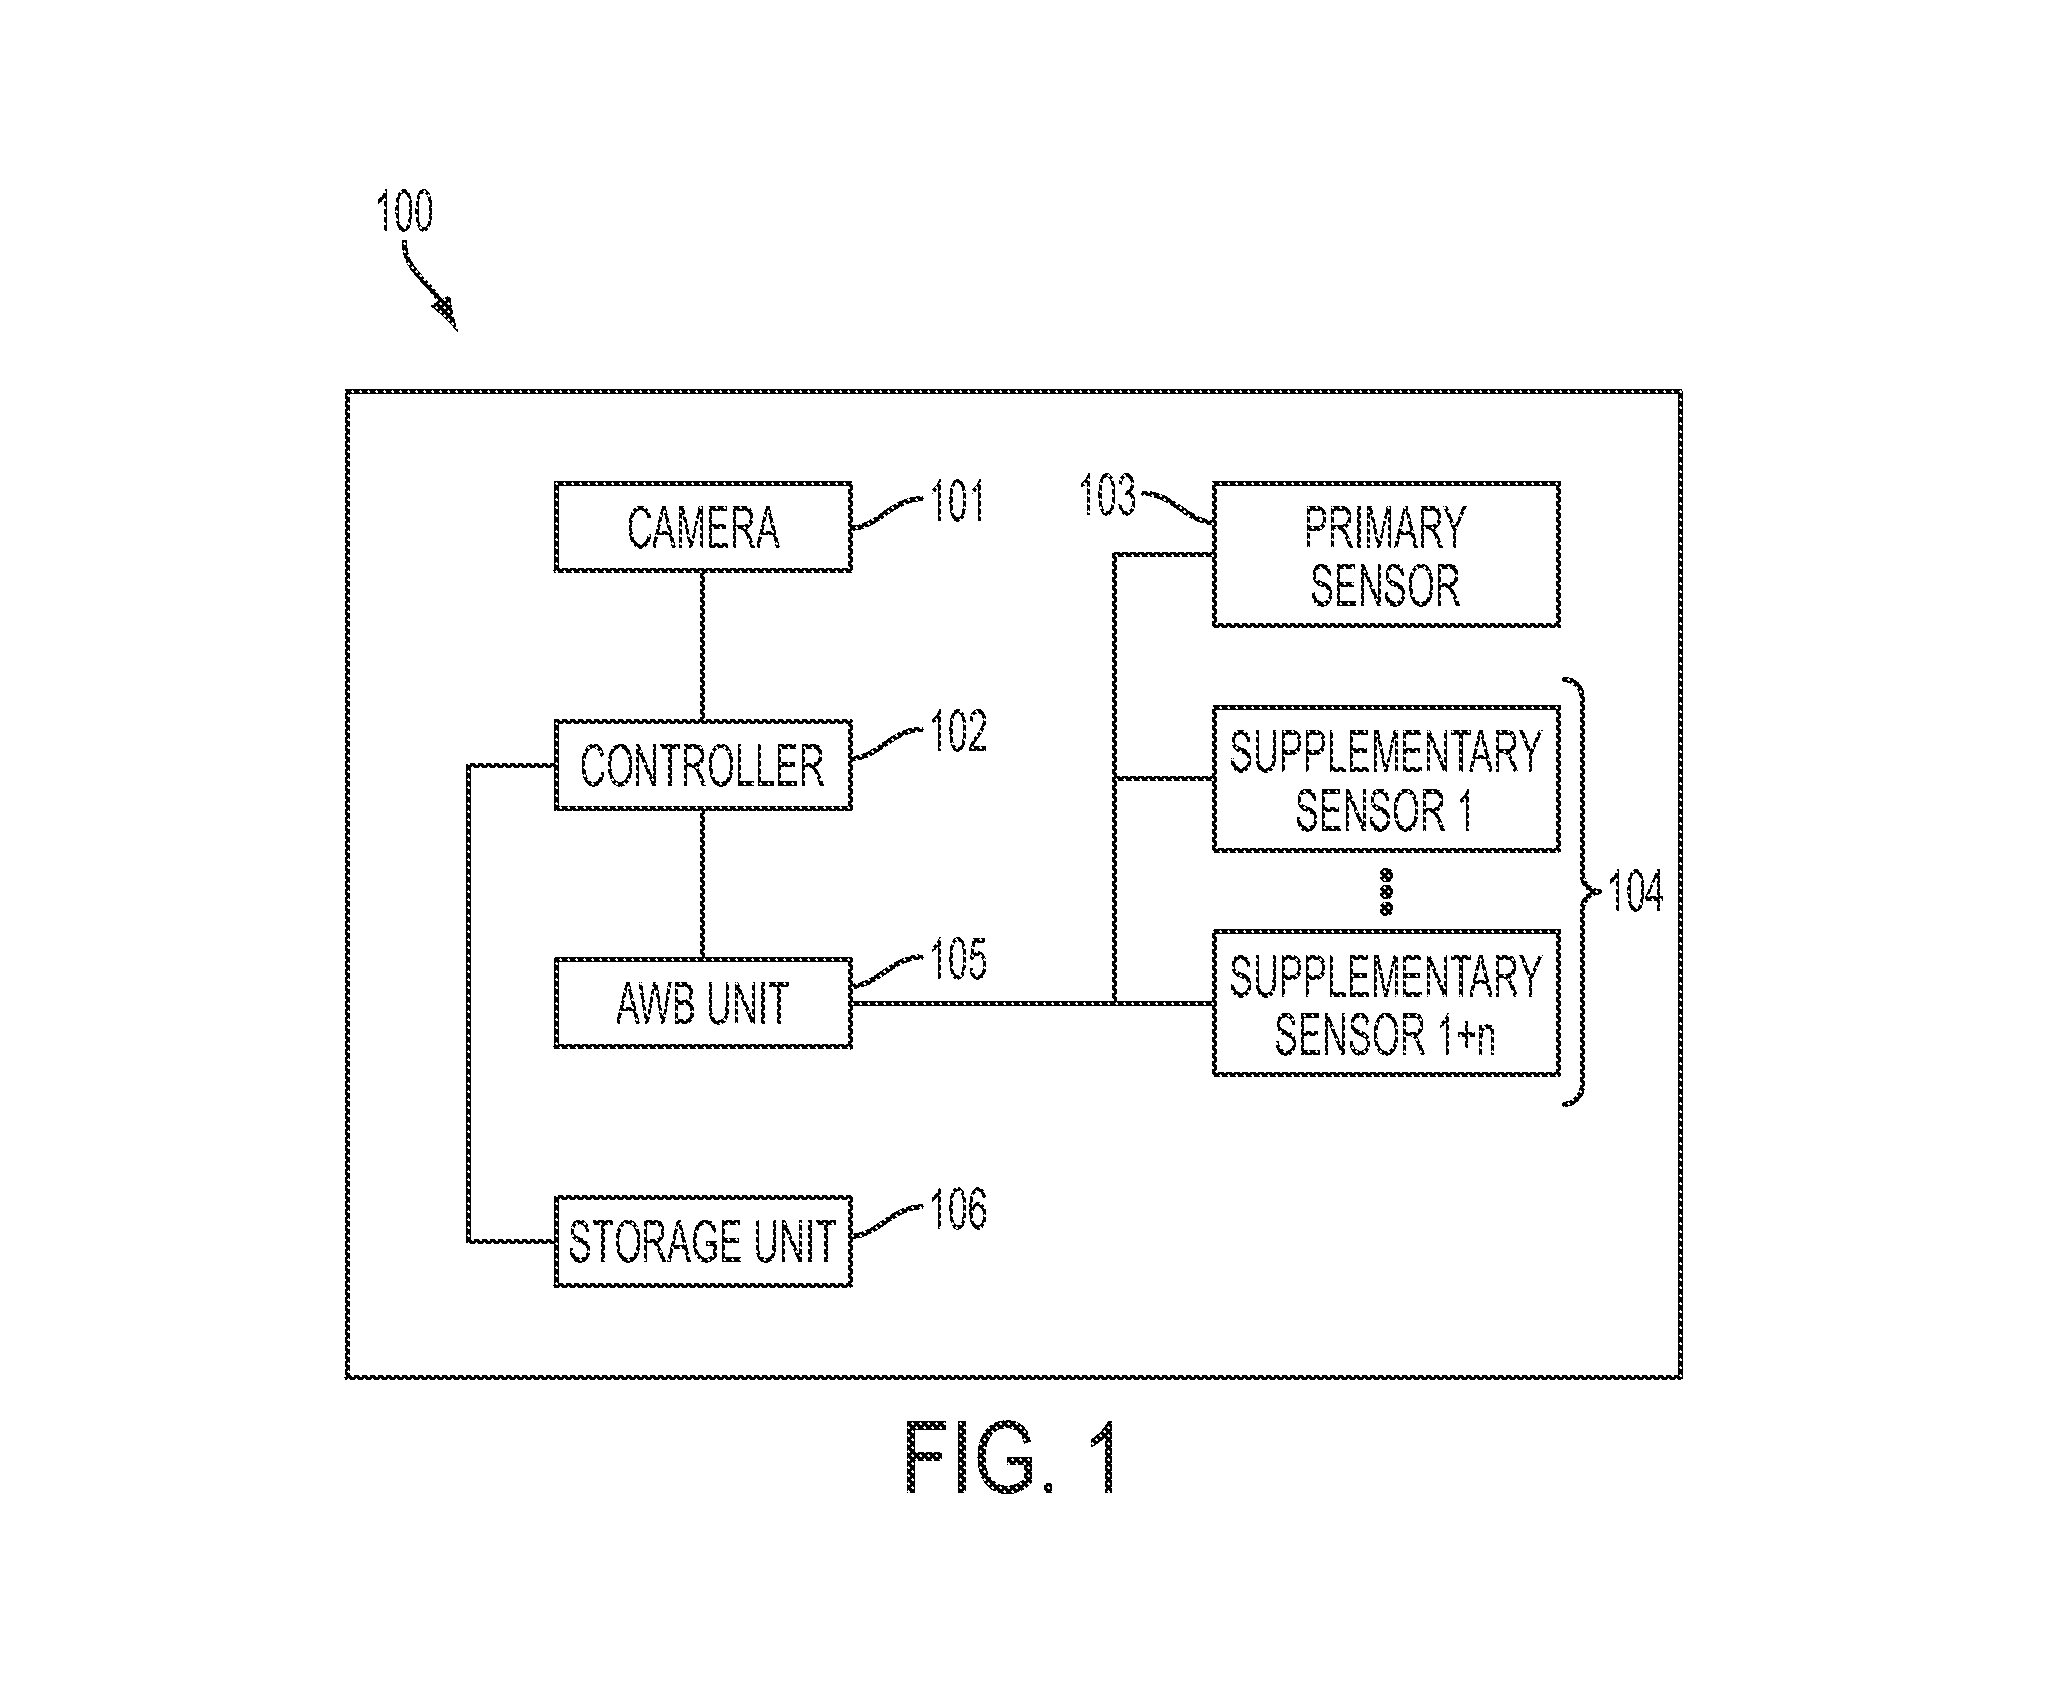 Apparatus and method for automatic white balance with supplementary sensors